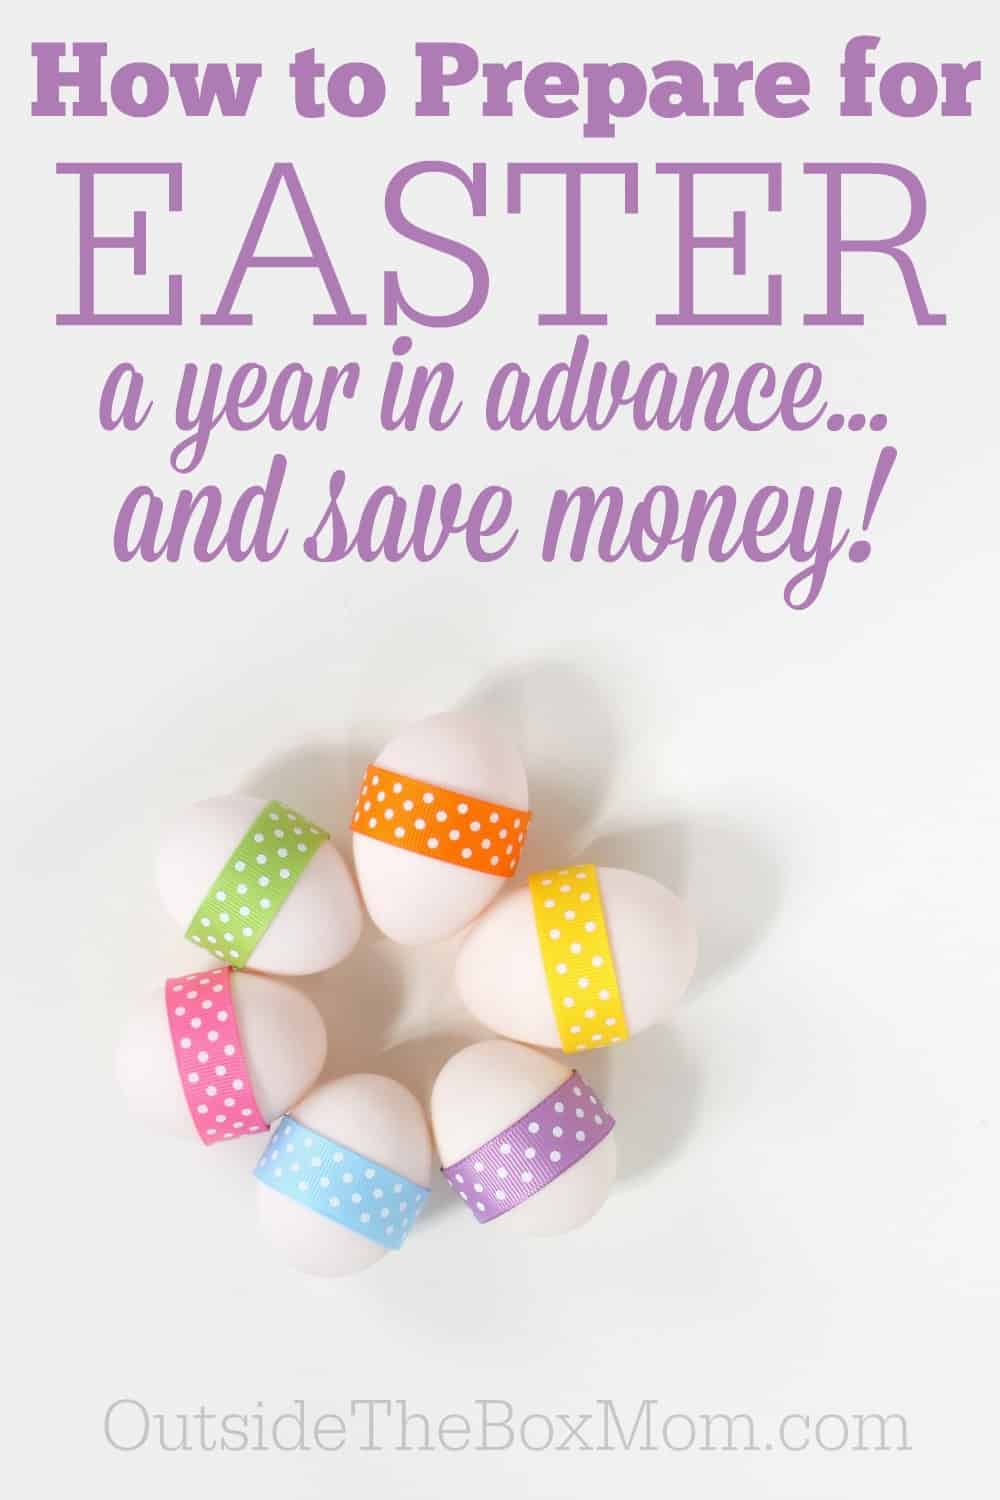 Now that Easter is over, did you know that there are a few easy ways you can get ahead for next year. You will save time, money, and another shopping trip with these easy tips on how to prepare for next Easter.